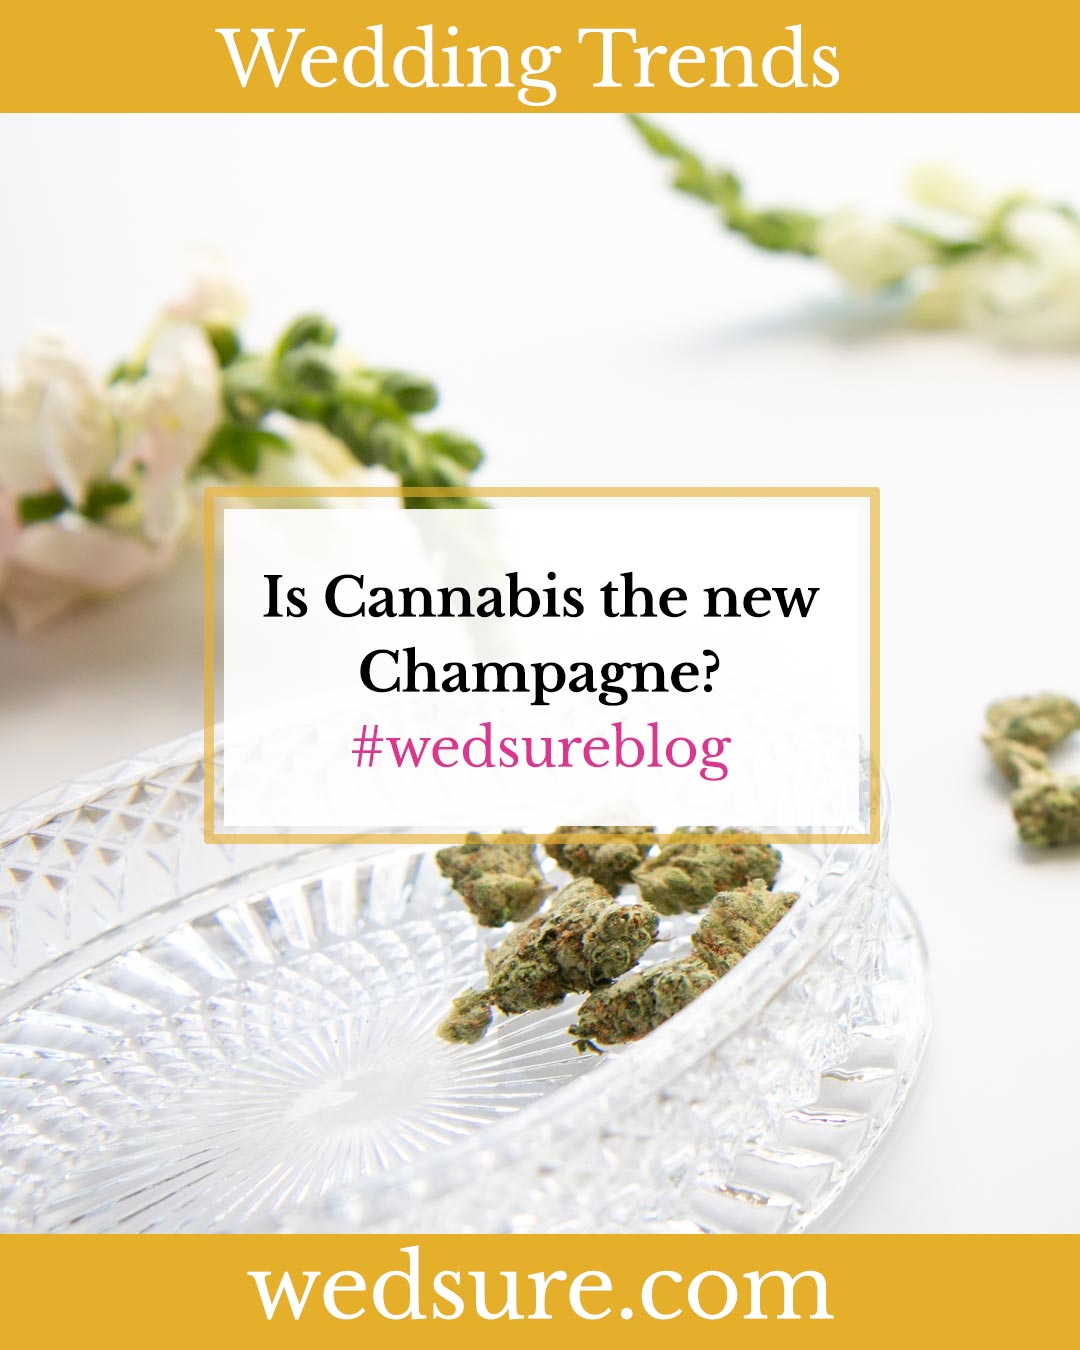 Is Cannabis the New Champagne at Weddings?